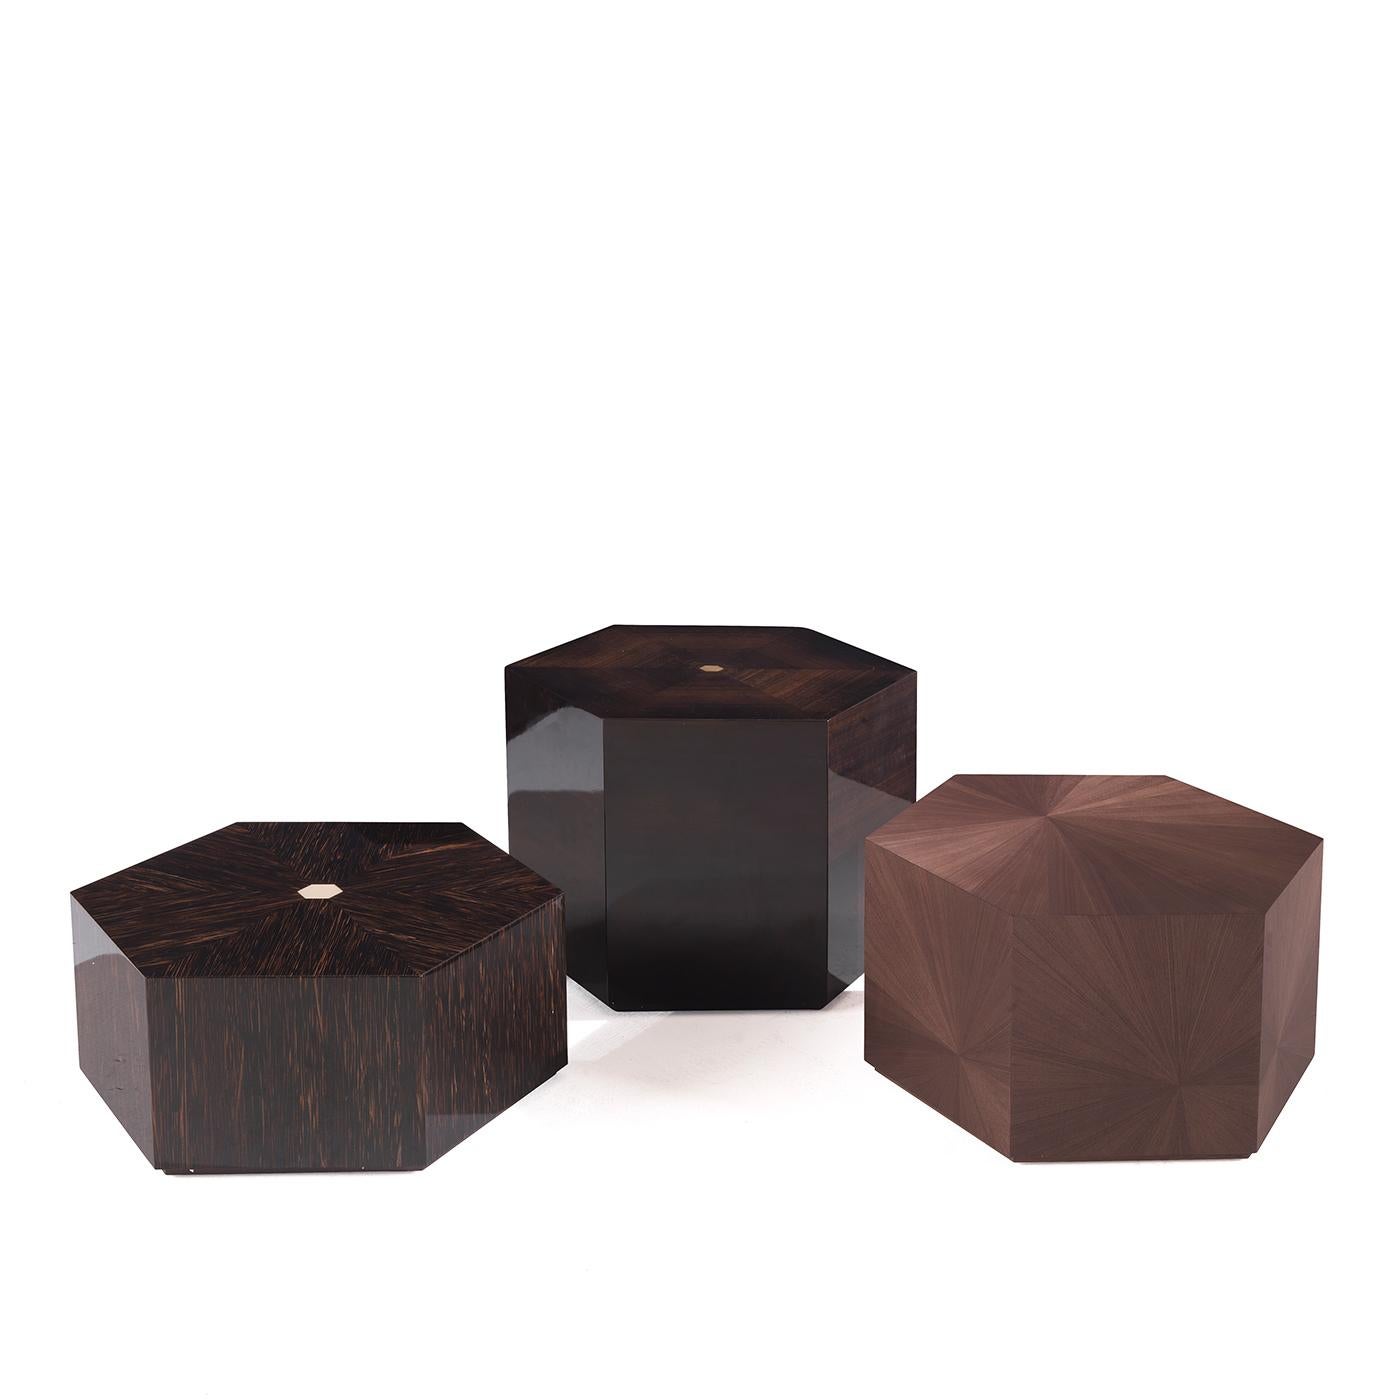 Subverting traditional design norms, this minimalist side table will add a bold touch to any interior with its distinctive design. The hexagonal frame is masterfully crafted of solid wood with eucalipto veneer. Versatile and bold, this piece can